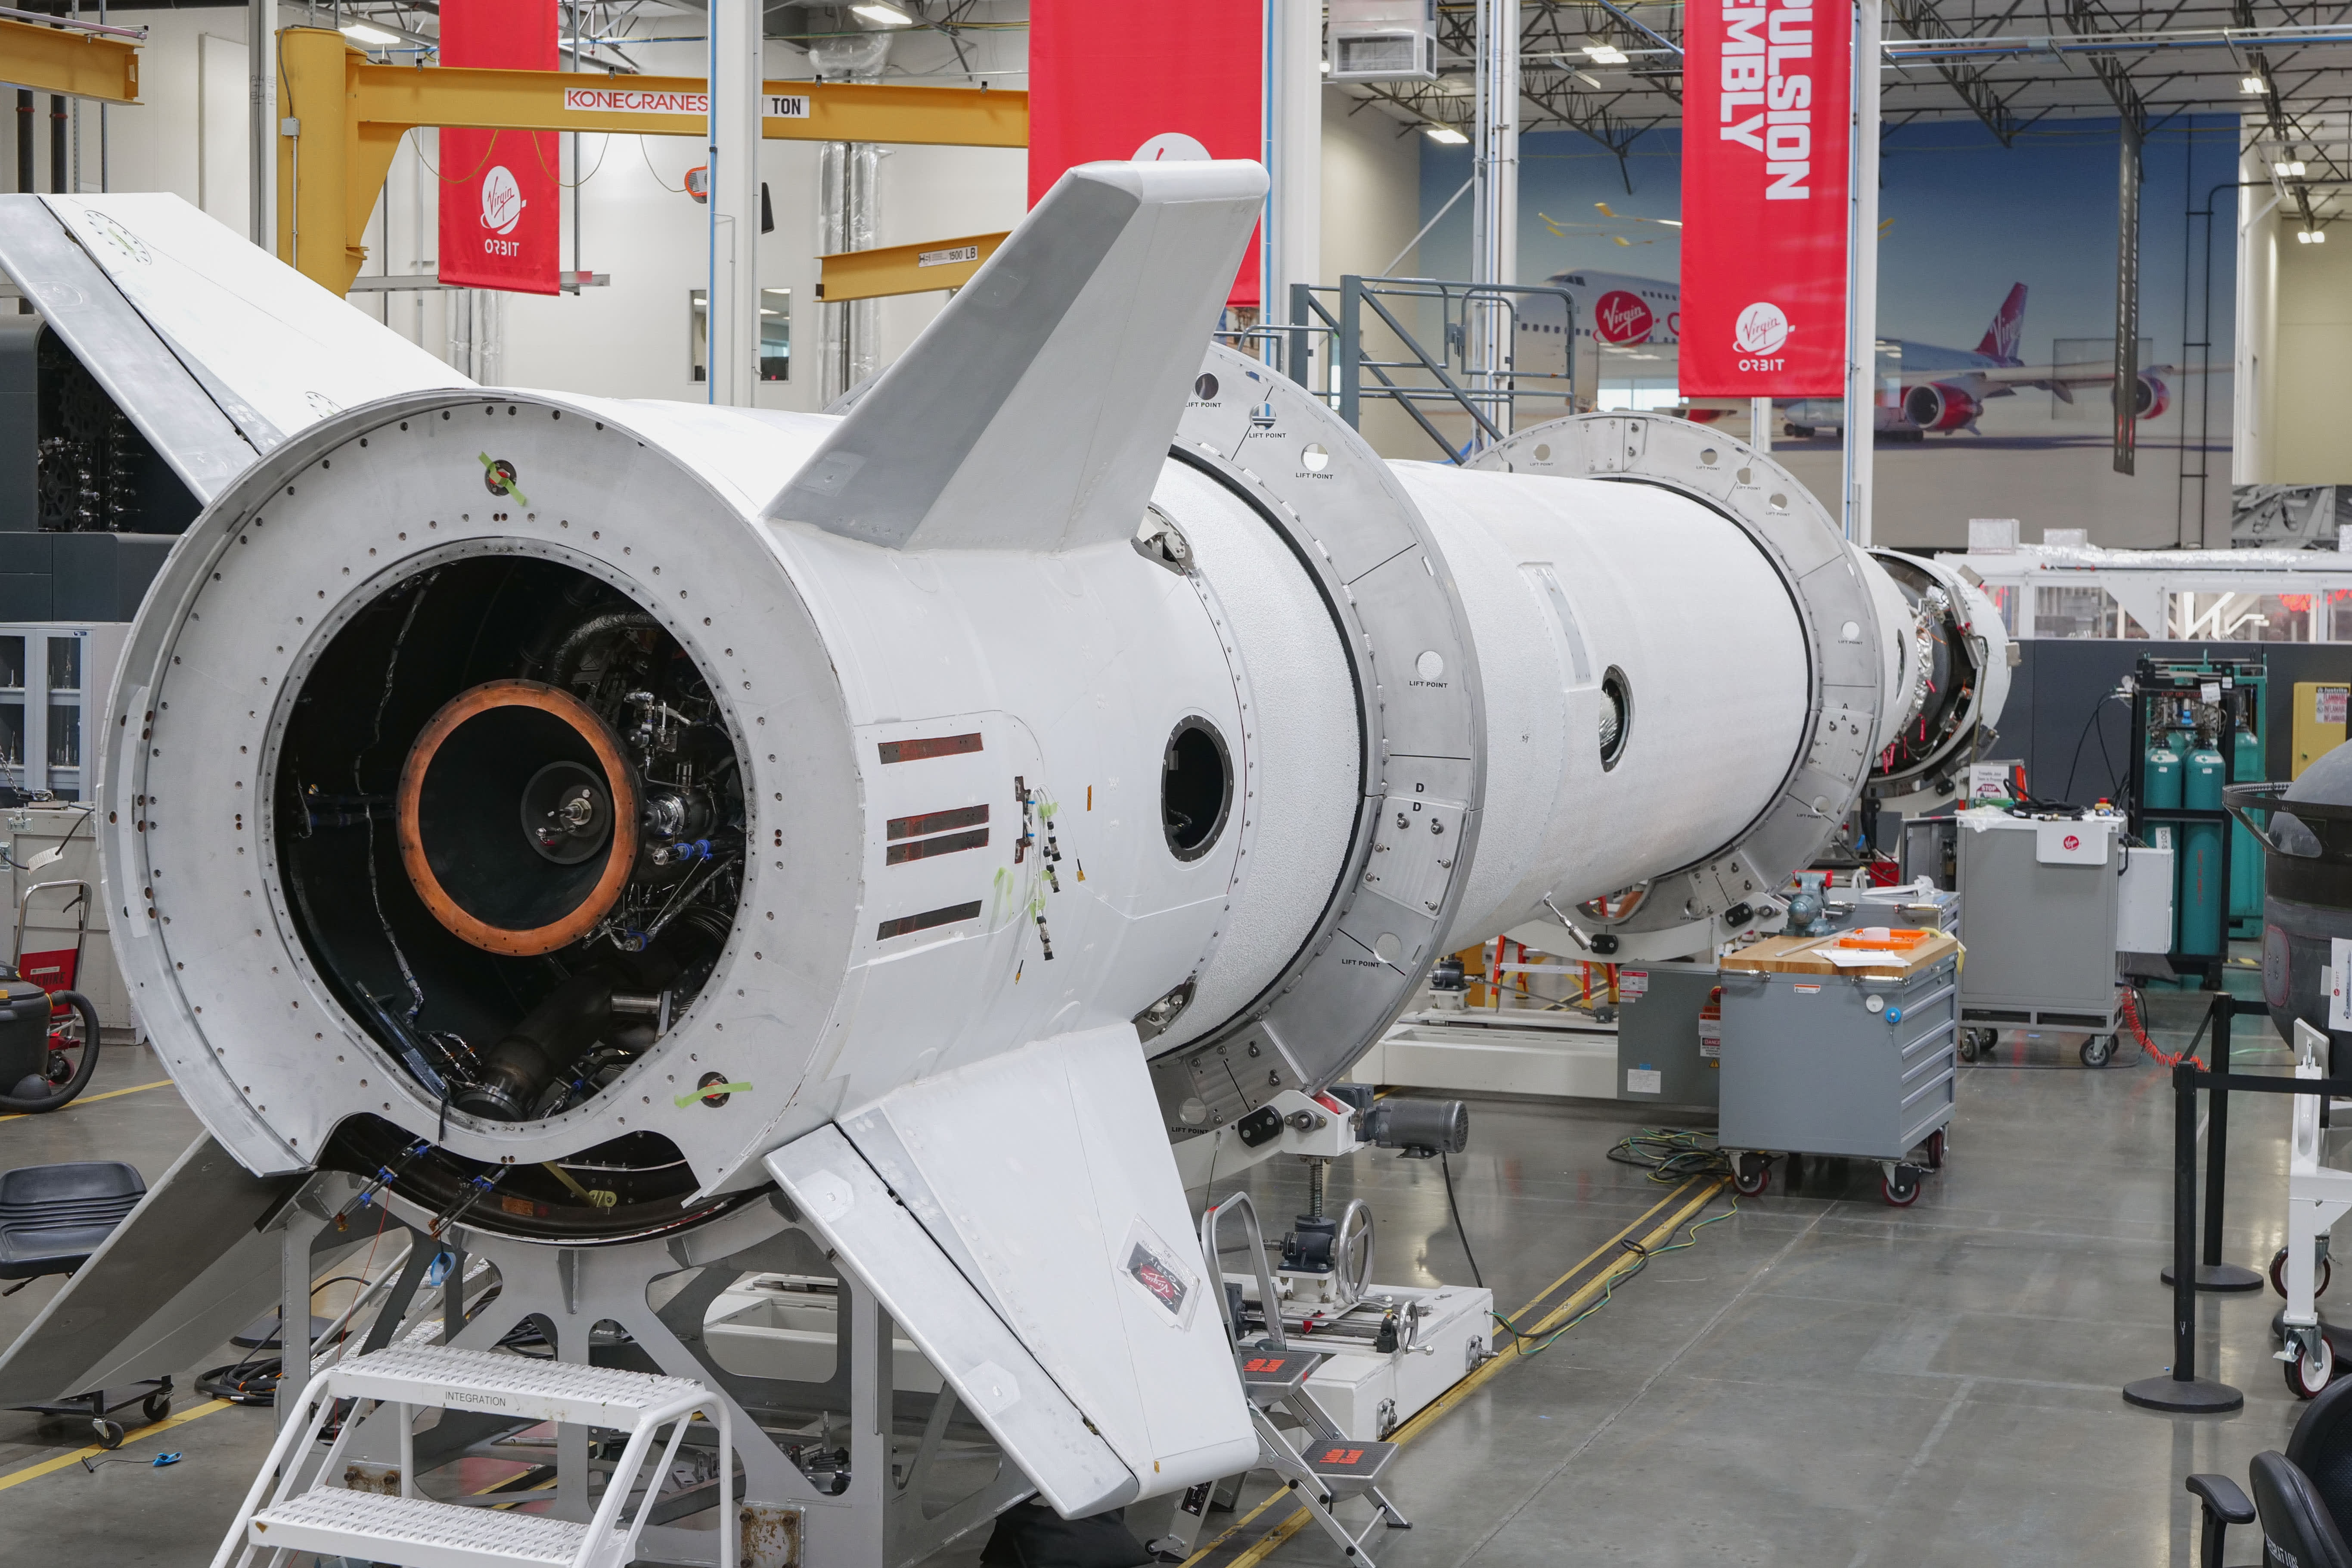 Virgin Orbit Announces Operational Pause and Employee Furlough Due to Financial Woes